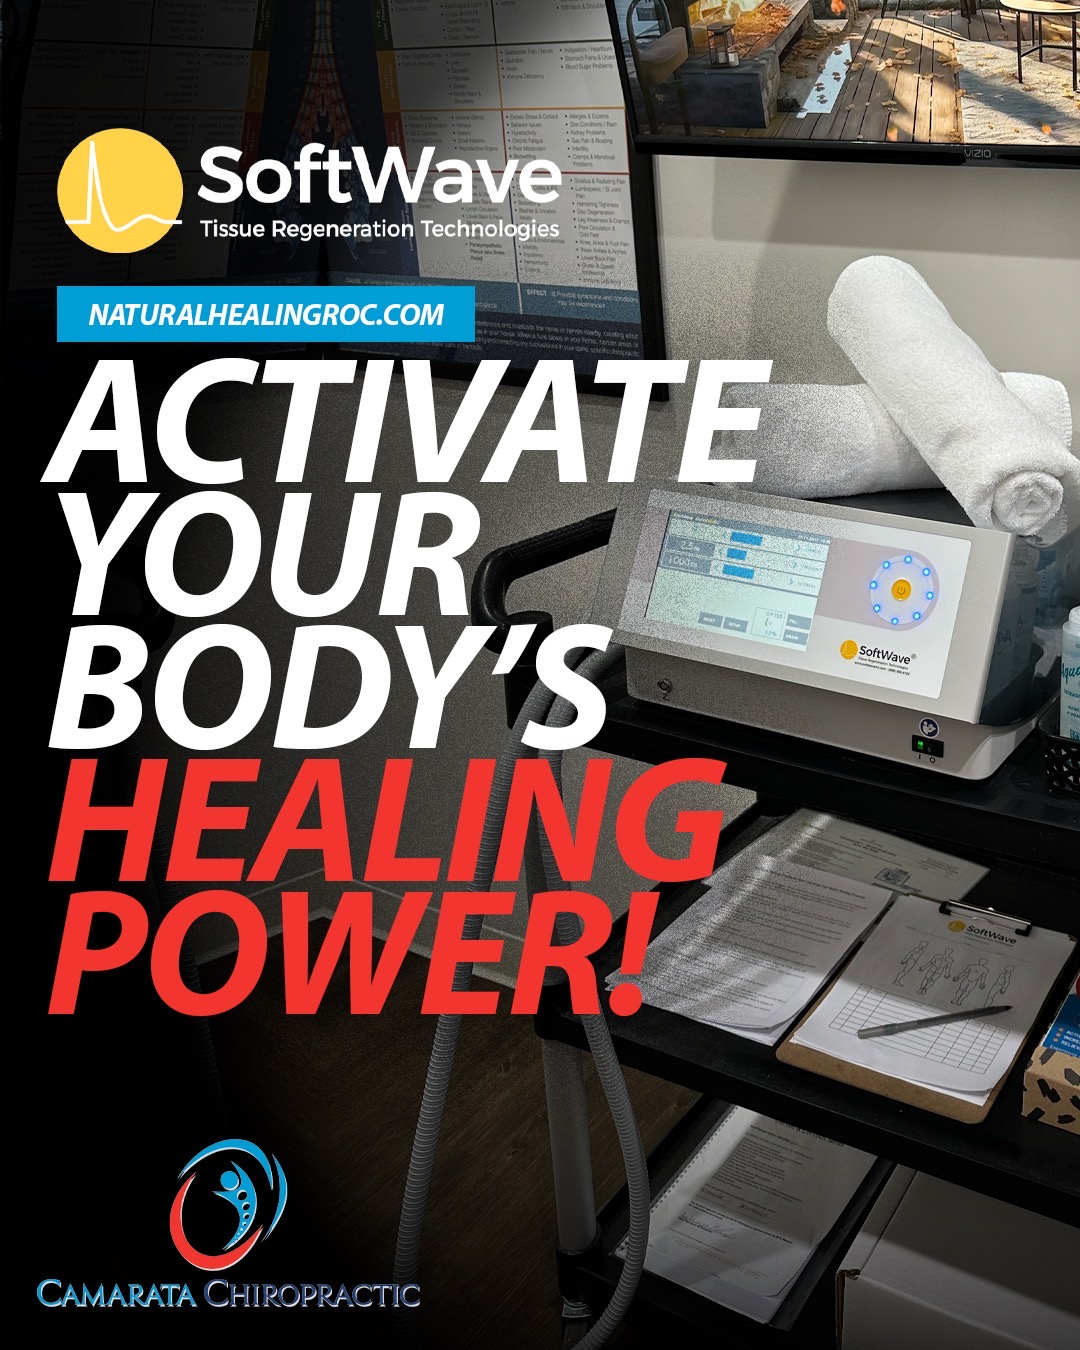 Activate Your Body's Healing Power with SoftWave Tissue Regeneration Technology